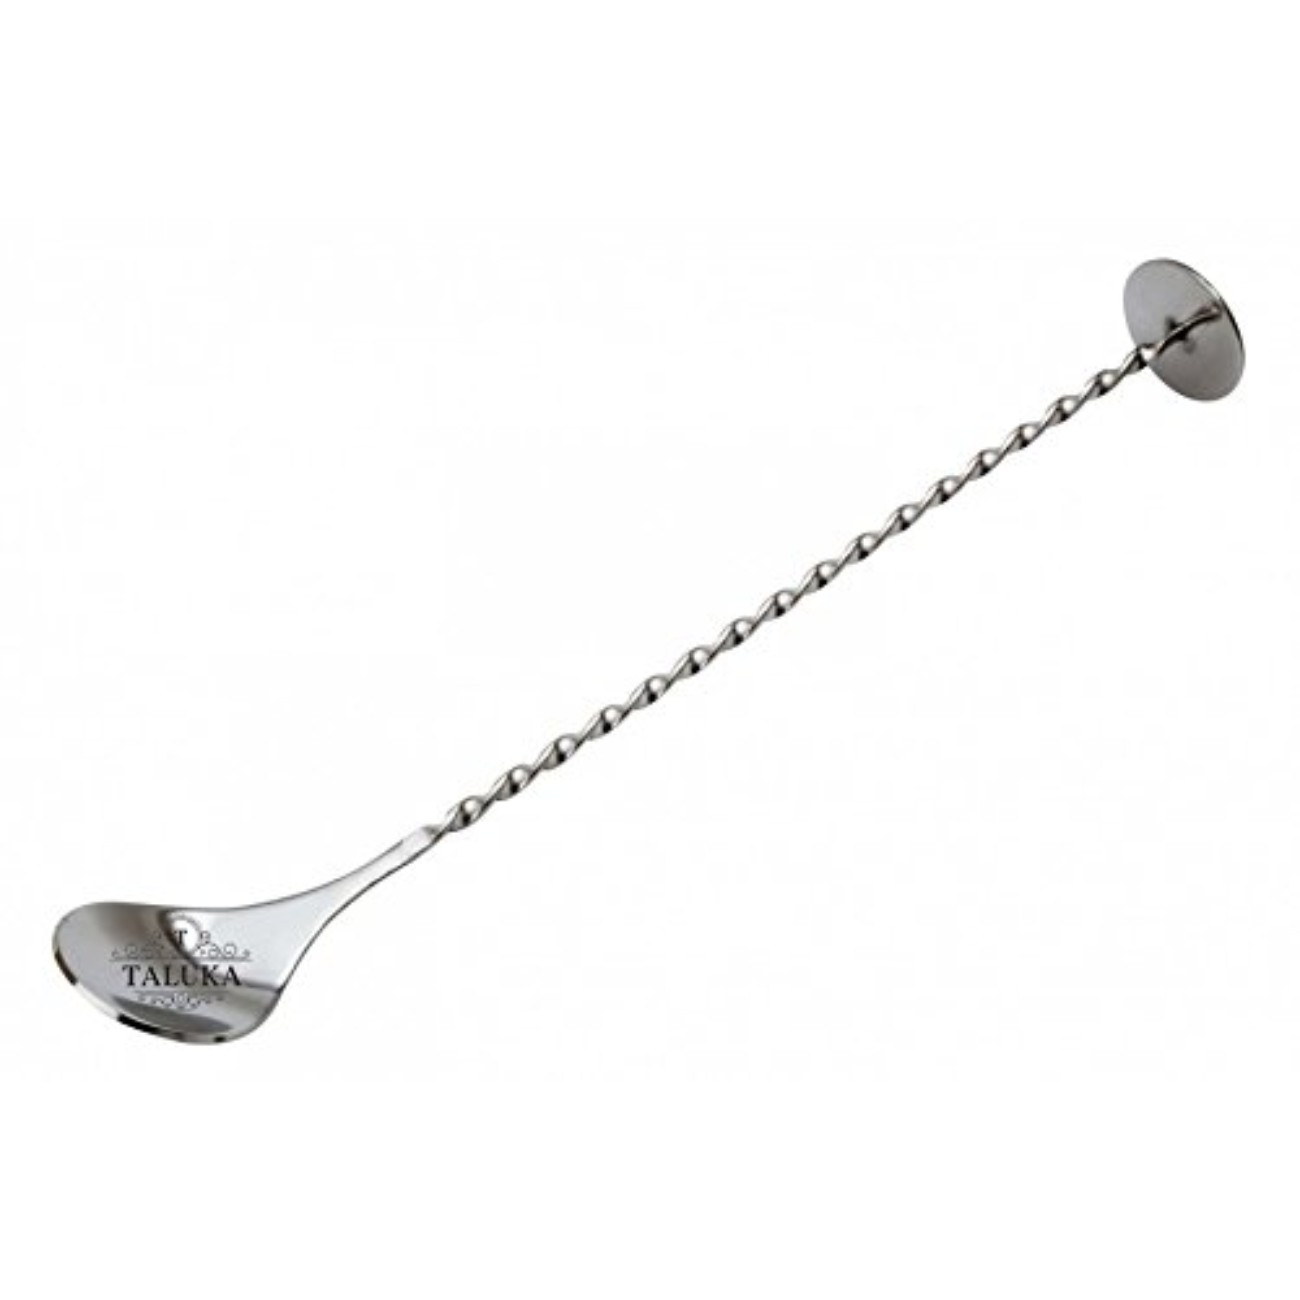 12 Inches Long Handle Bar Cocktail Shaker Spoon Coffee Spoon Handfly Stainless Steel Mixing Spoon Blue 